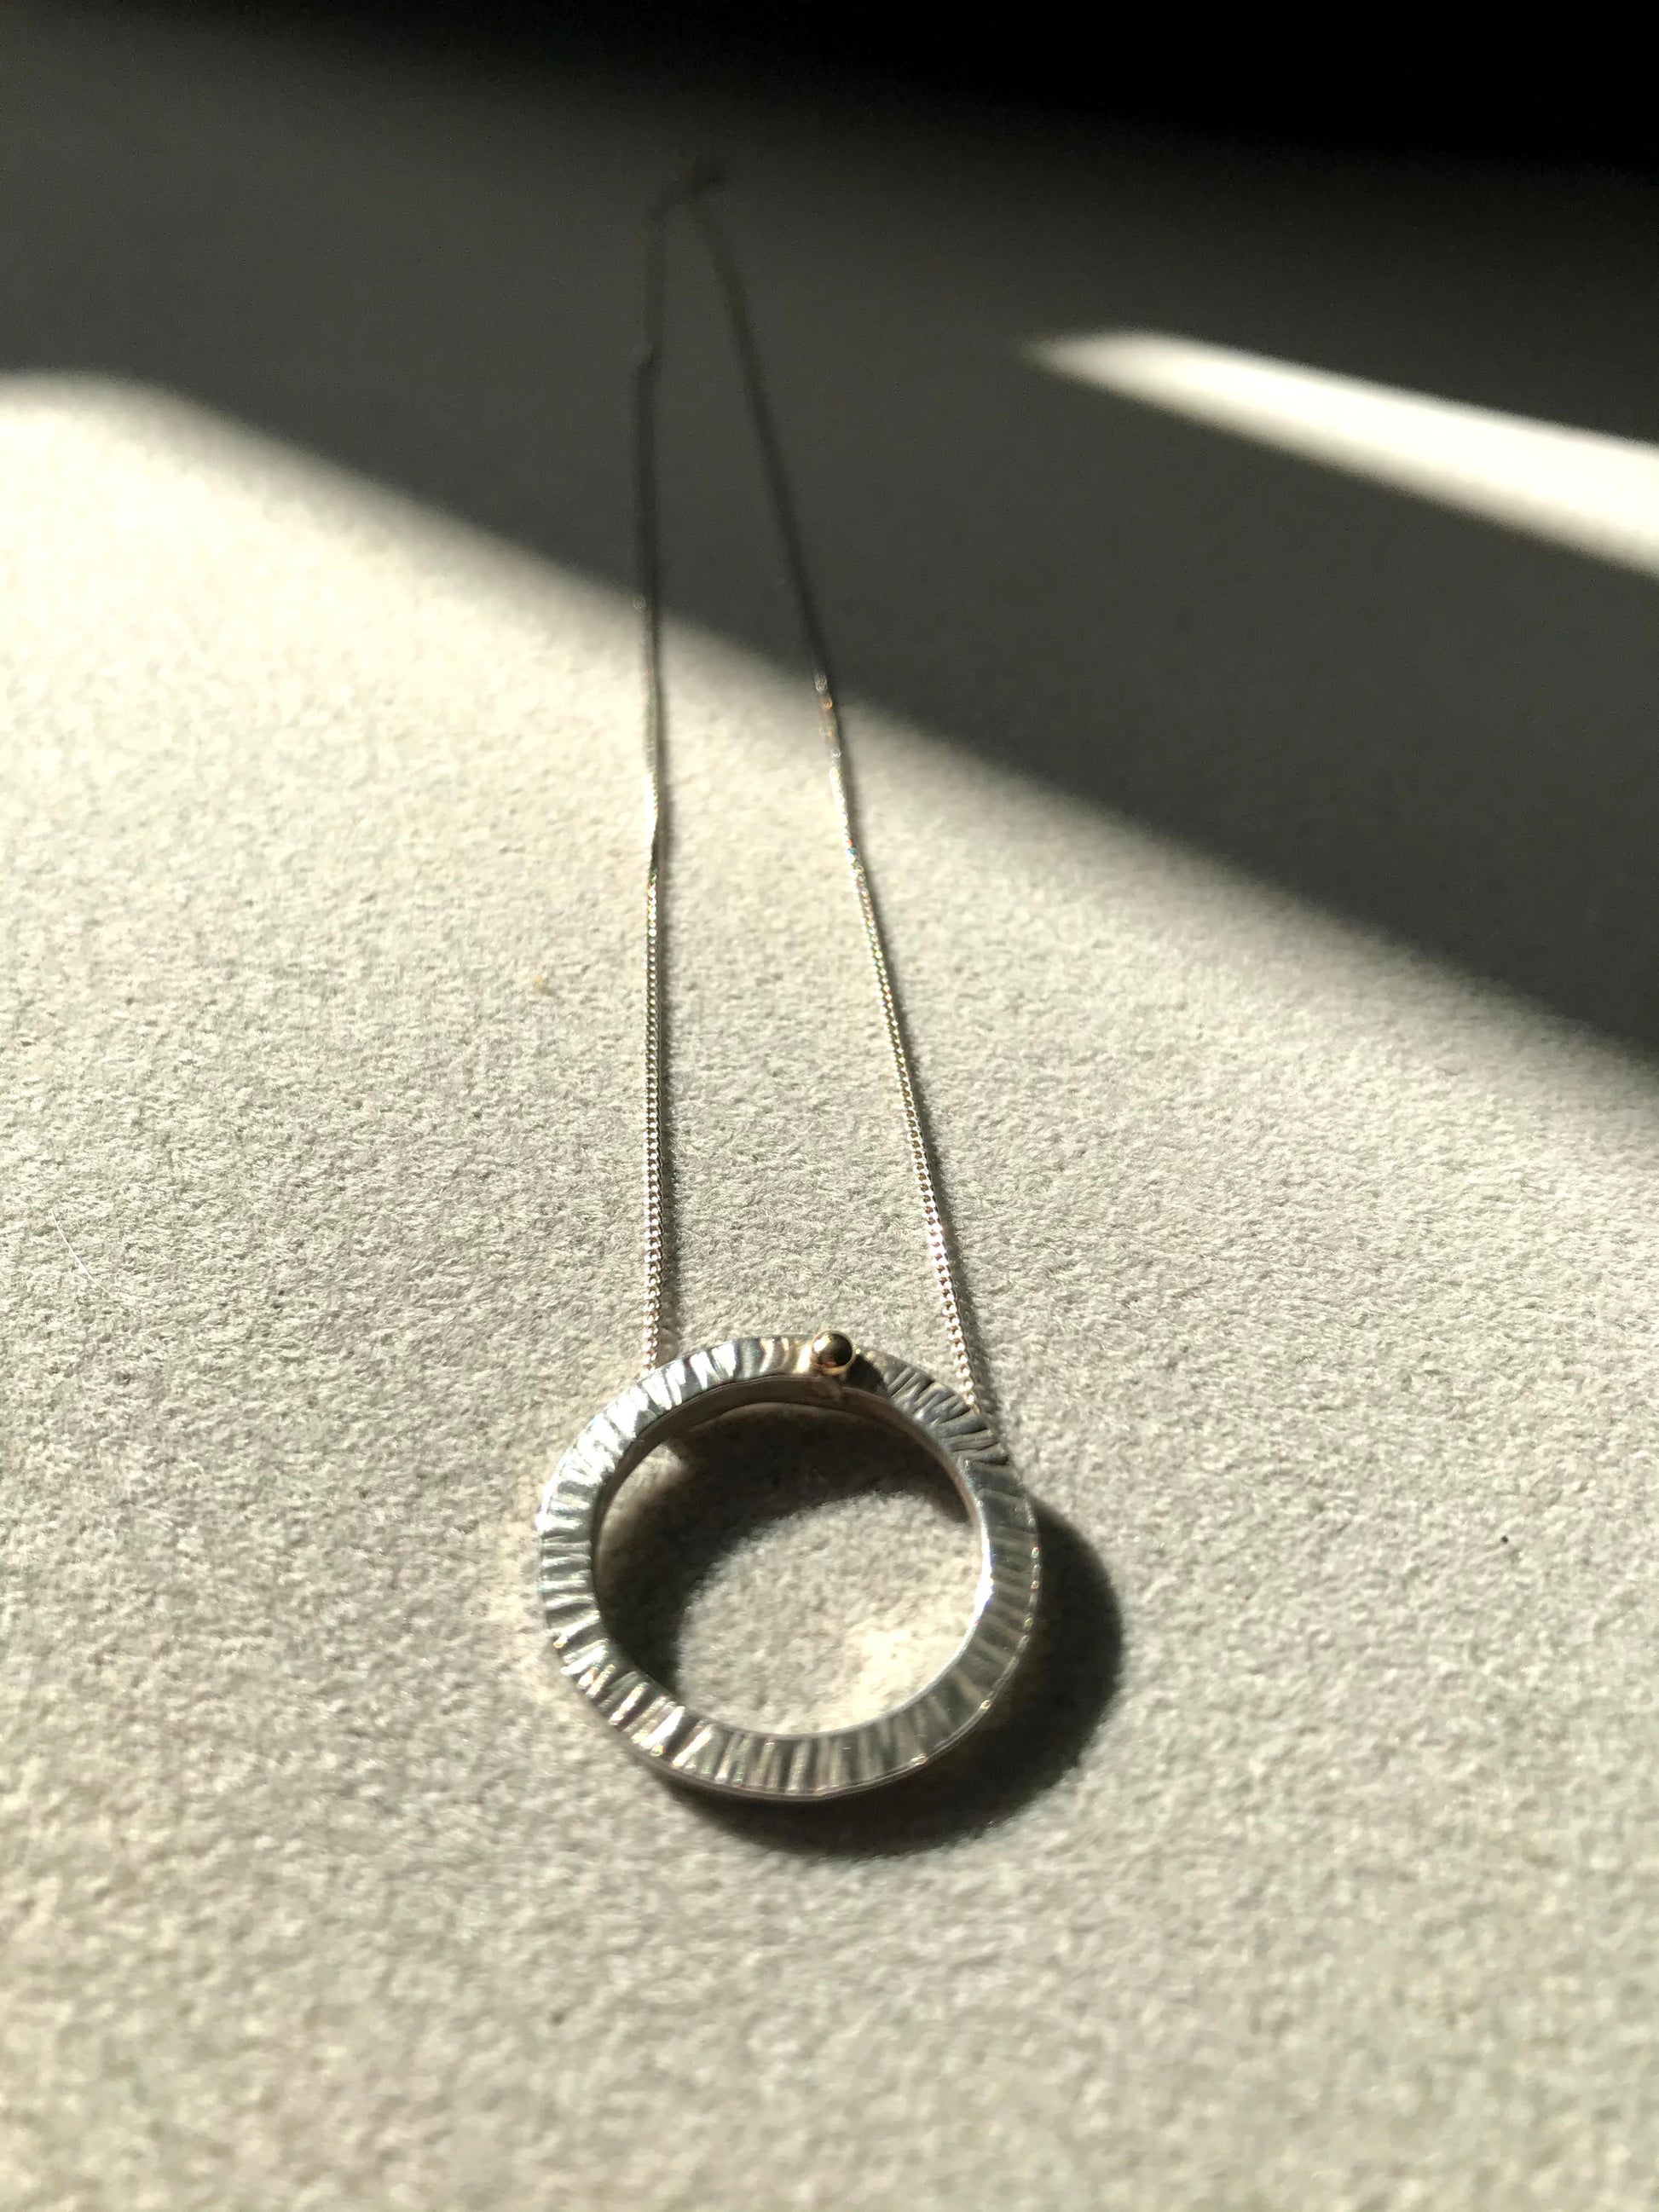 Handmade sterling silver 16mm diameter circle - hammered finish to represent rays of the sun hence the name 'Rise' - this little pendant is suspended on a sterling silver diamond cut curb chain 40cm or 45cm length. The  piece is complete with a ball of 9ct gold so you can Rise with gold.